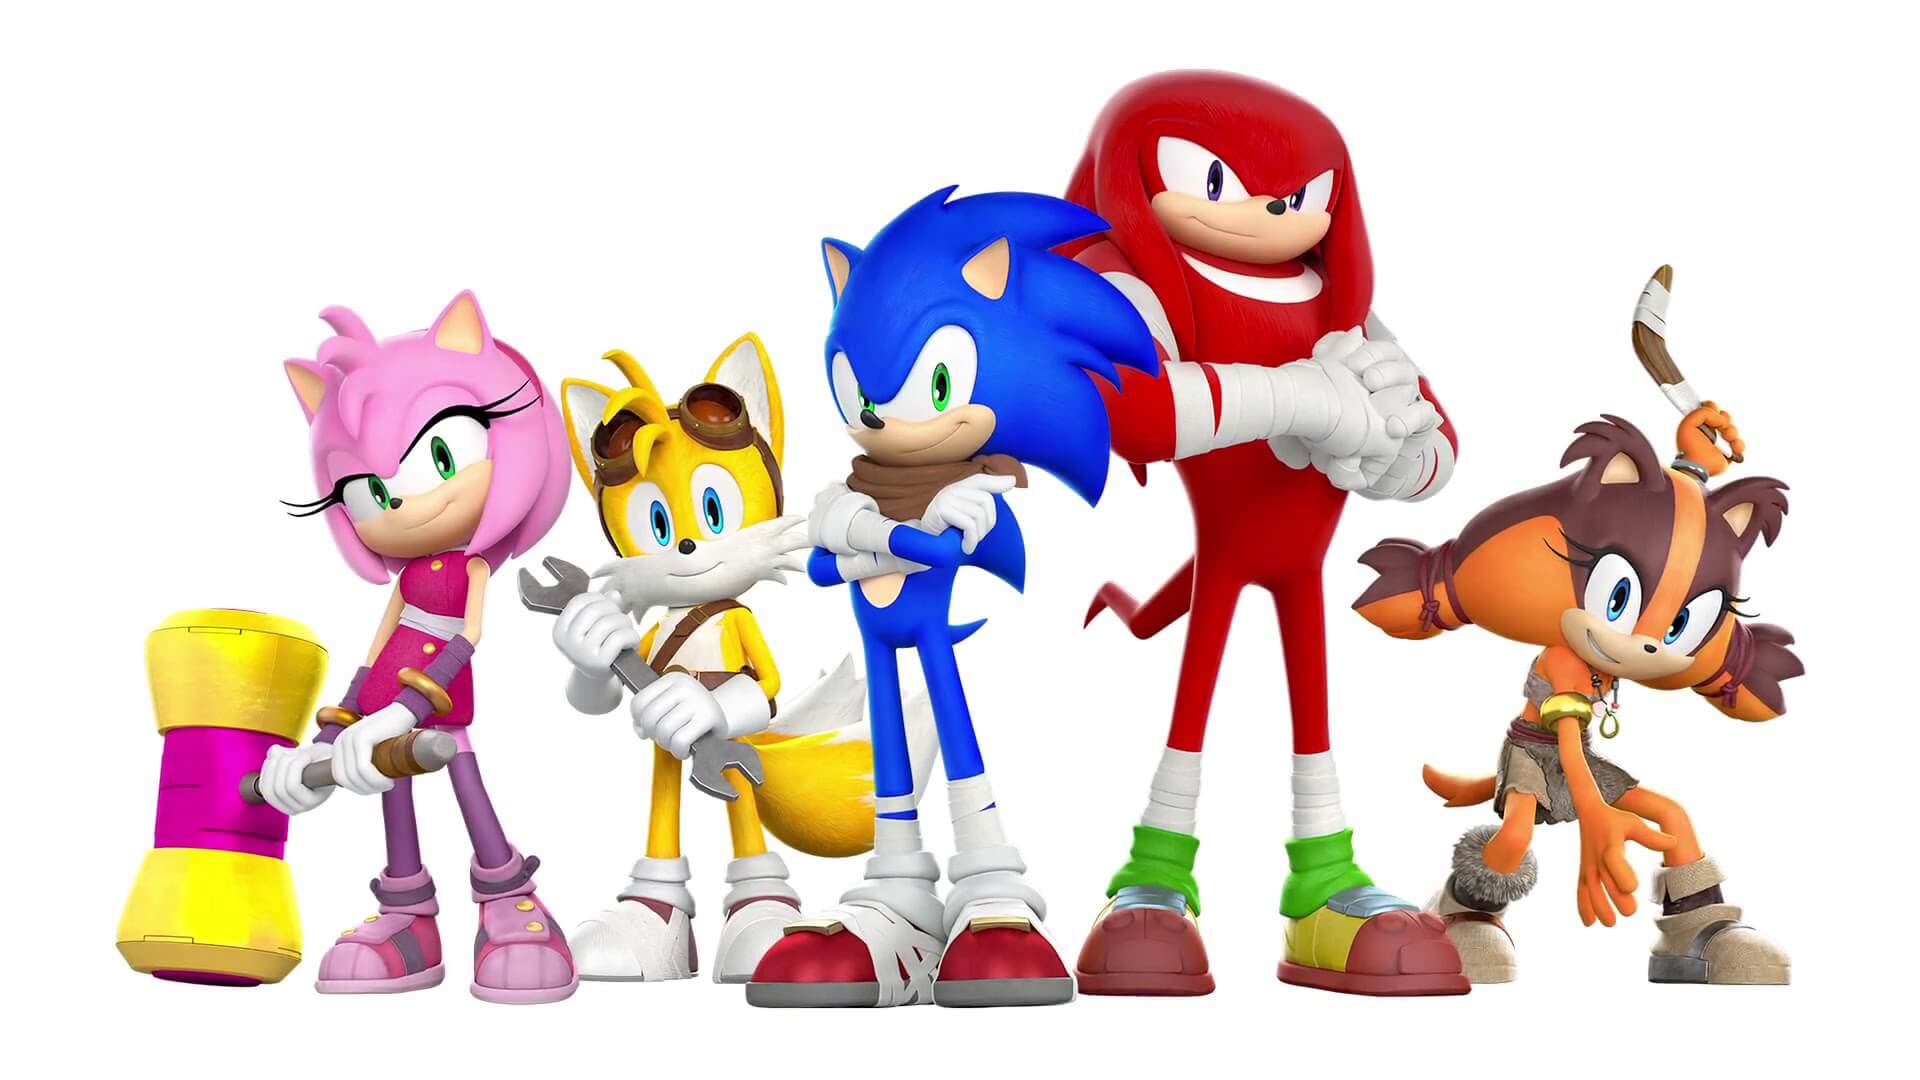 Sonic Boom is the Worst-Selling Sonic Title in History